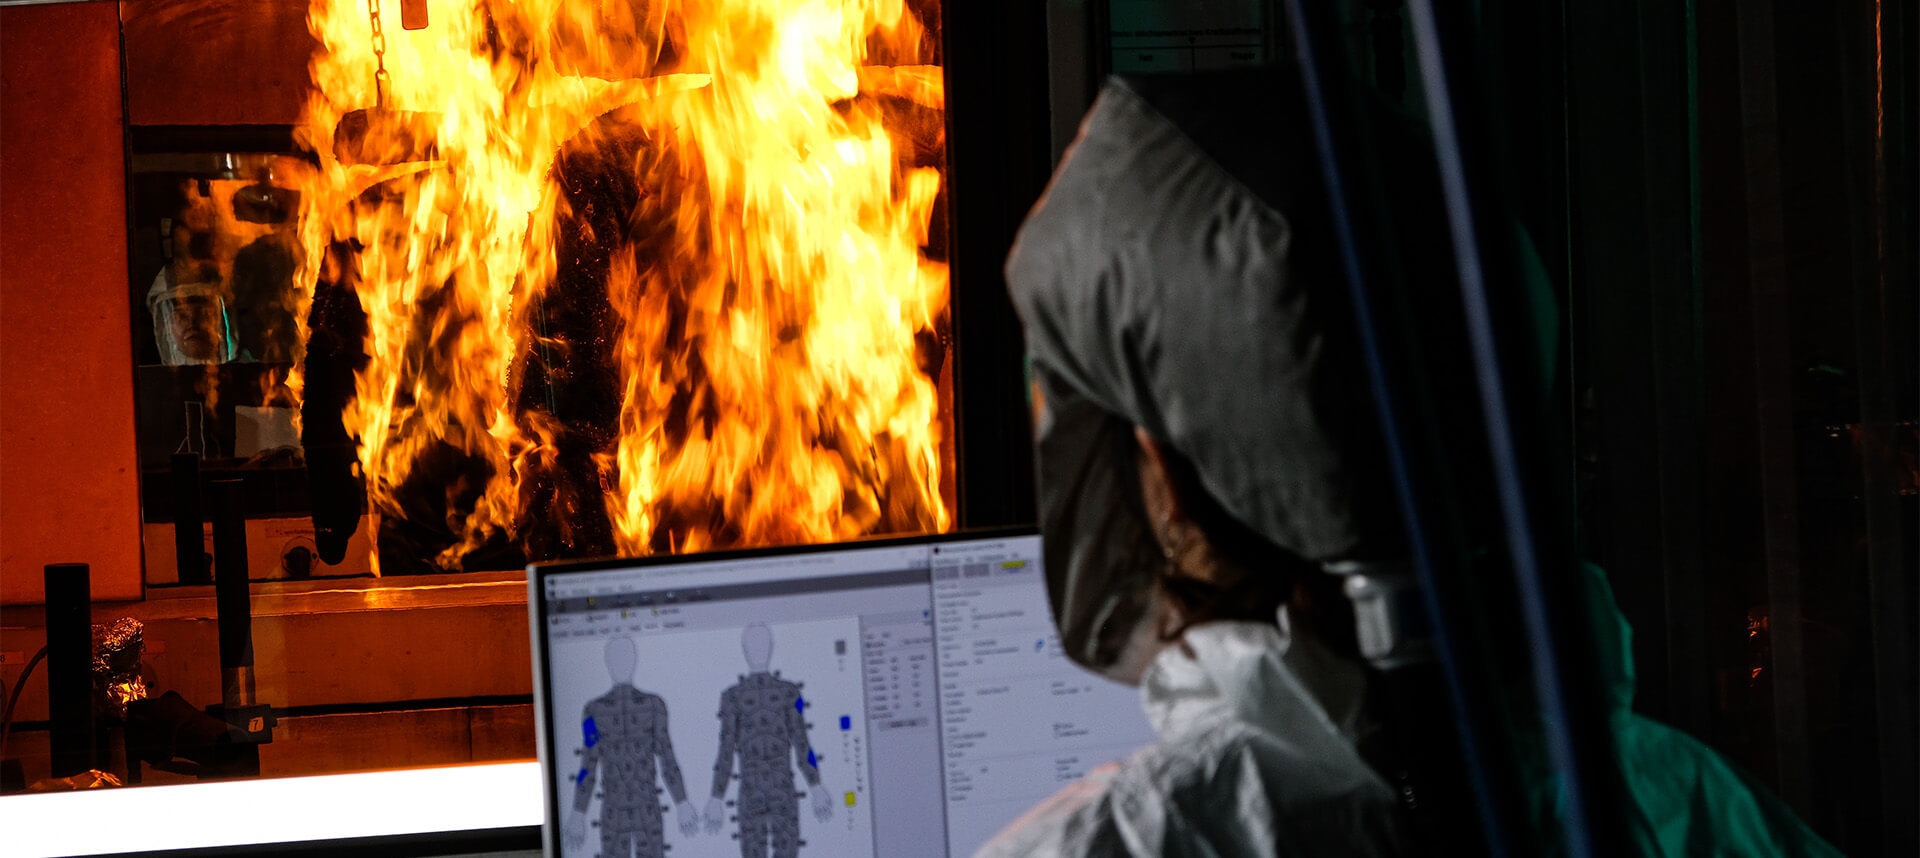 Fit is critical when choosing flame-resistant clothing, 2016-04-01